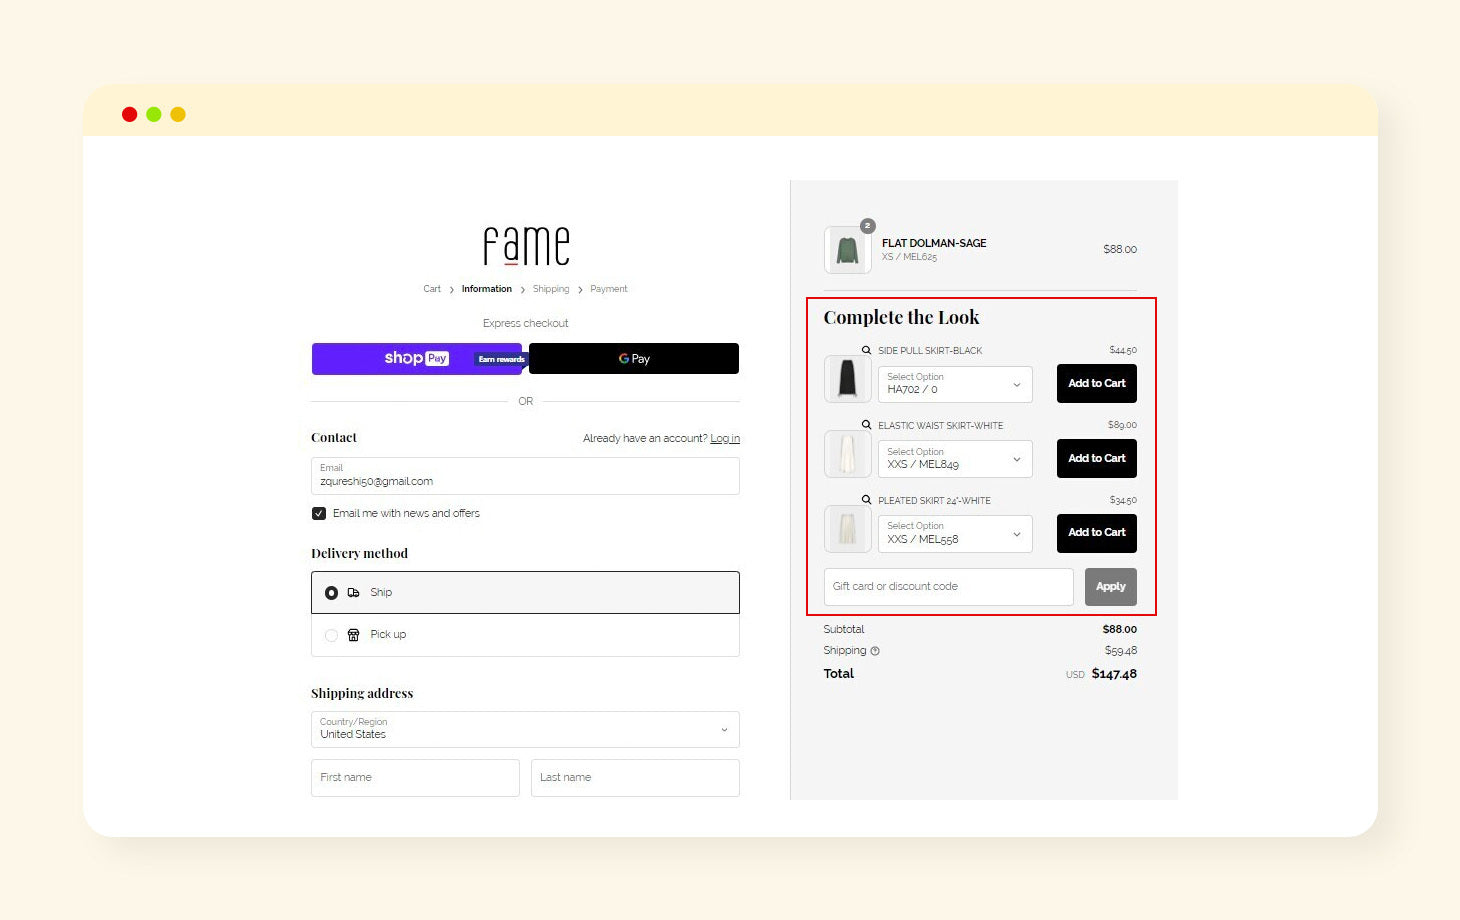 Top 7 Reasons To Customize Shopify Checkout- Seizing Untapped Upselling and Cross-Selling Prospects-Shopify Checkout Customization